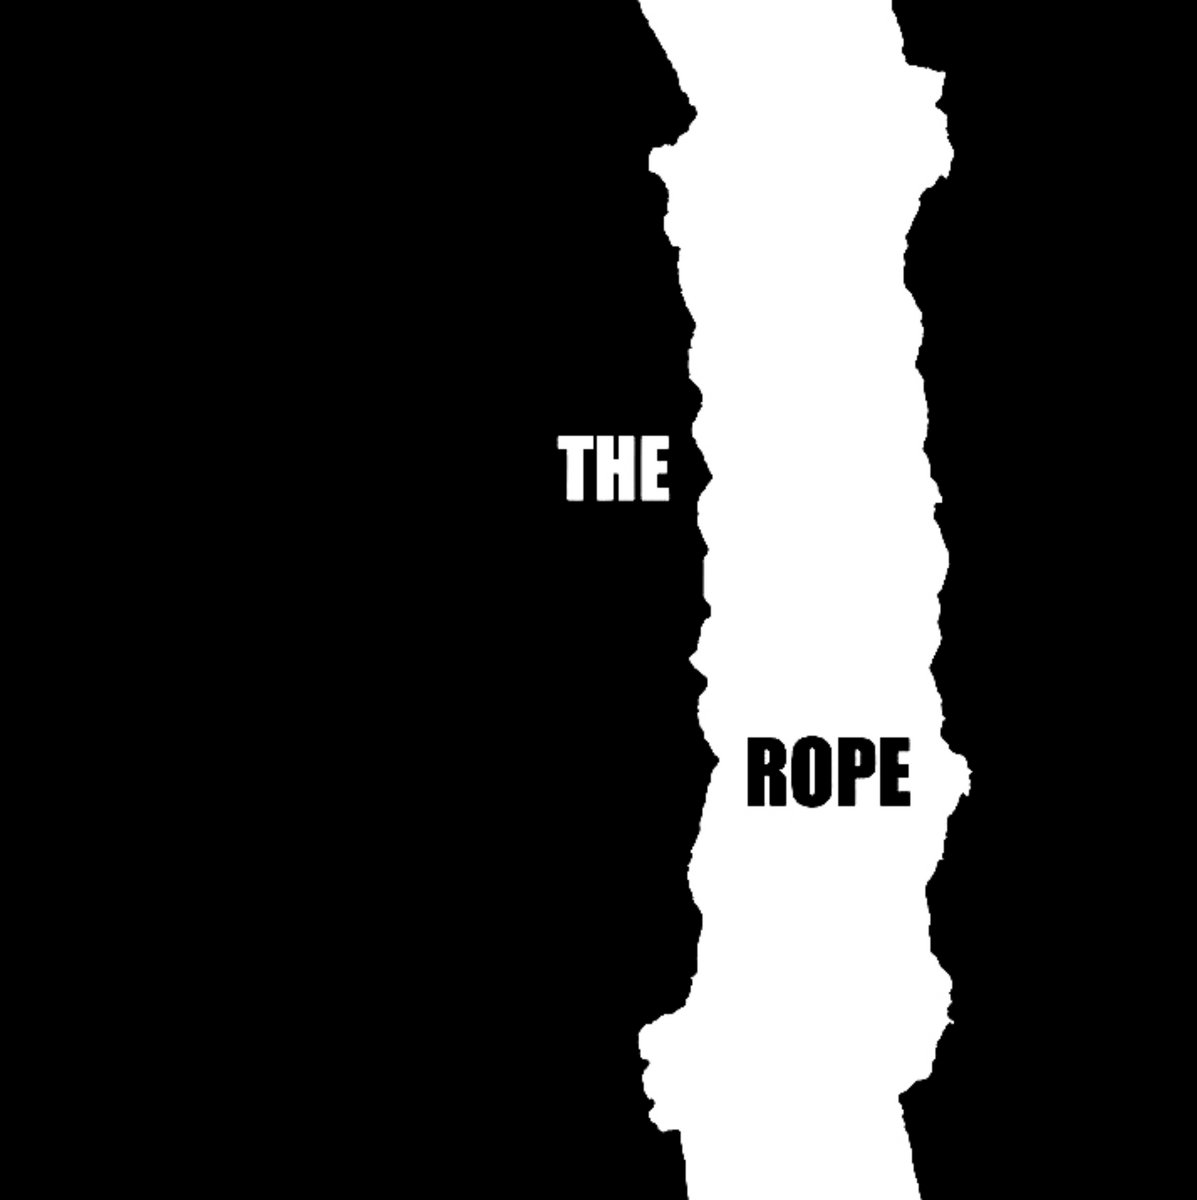 Rope, The - Jericho